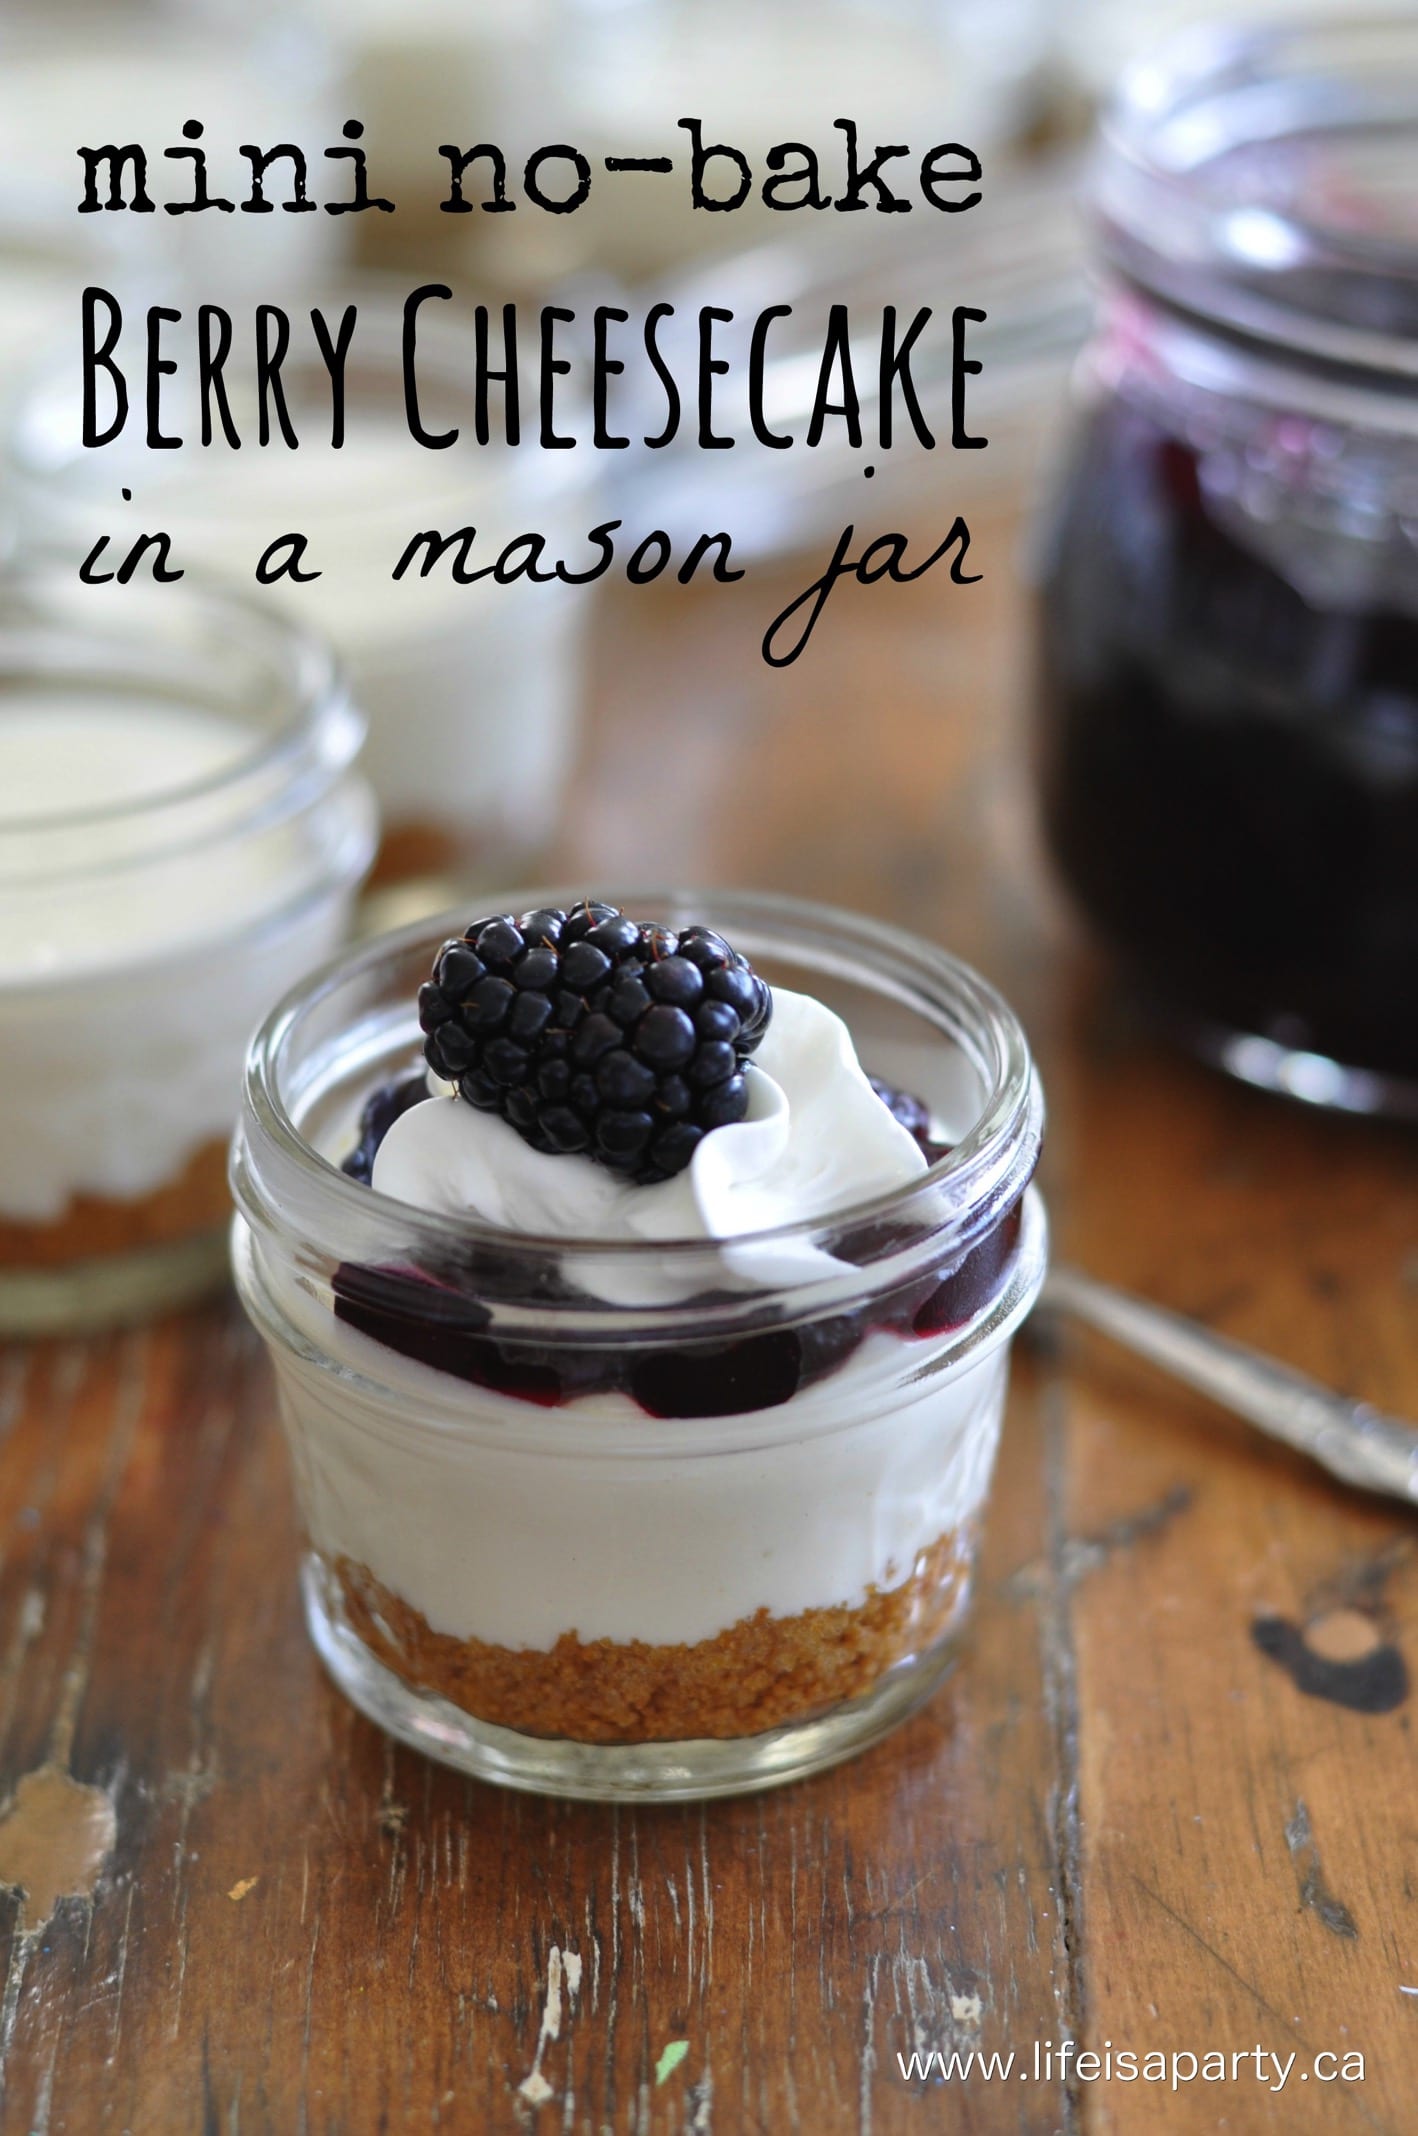 Mini No-Bake Berry Cheesecake In A Mason Jar -the perfect cute, portable, easy treat! Top with any fruit you like best. Indiviual serving size.